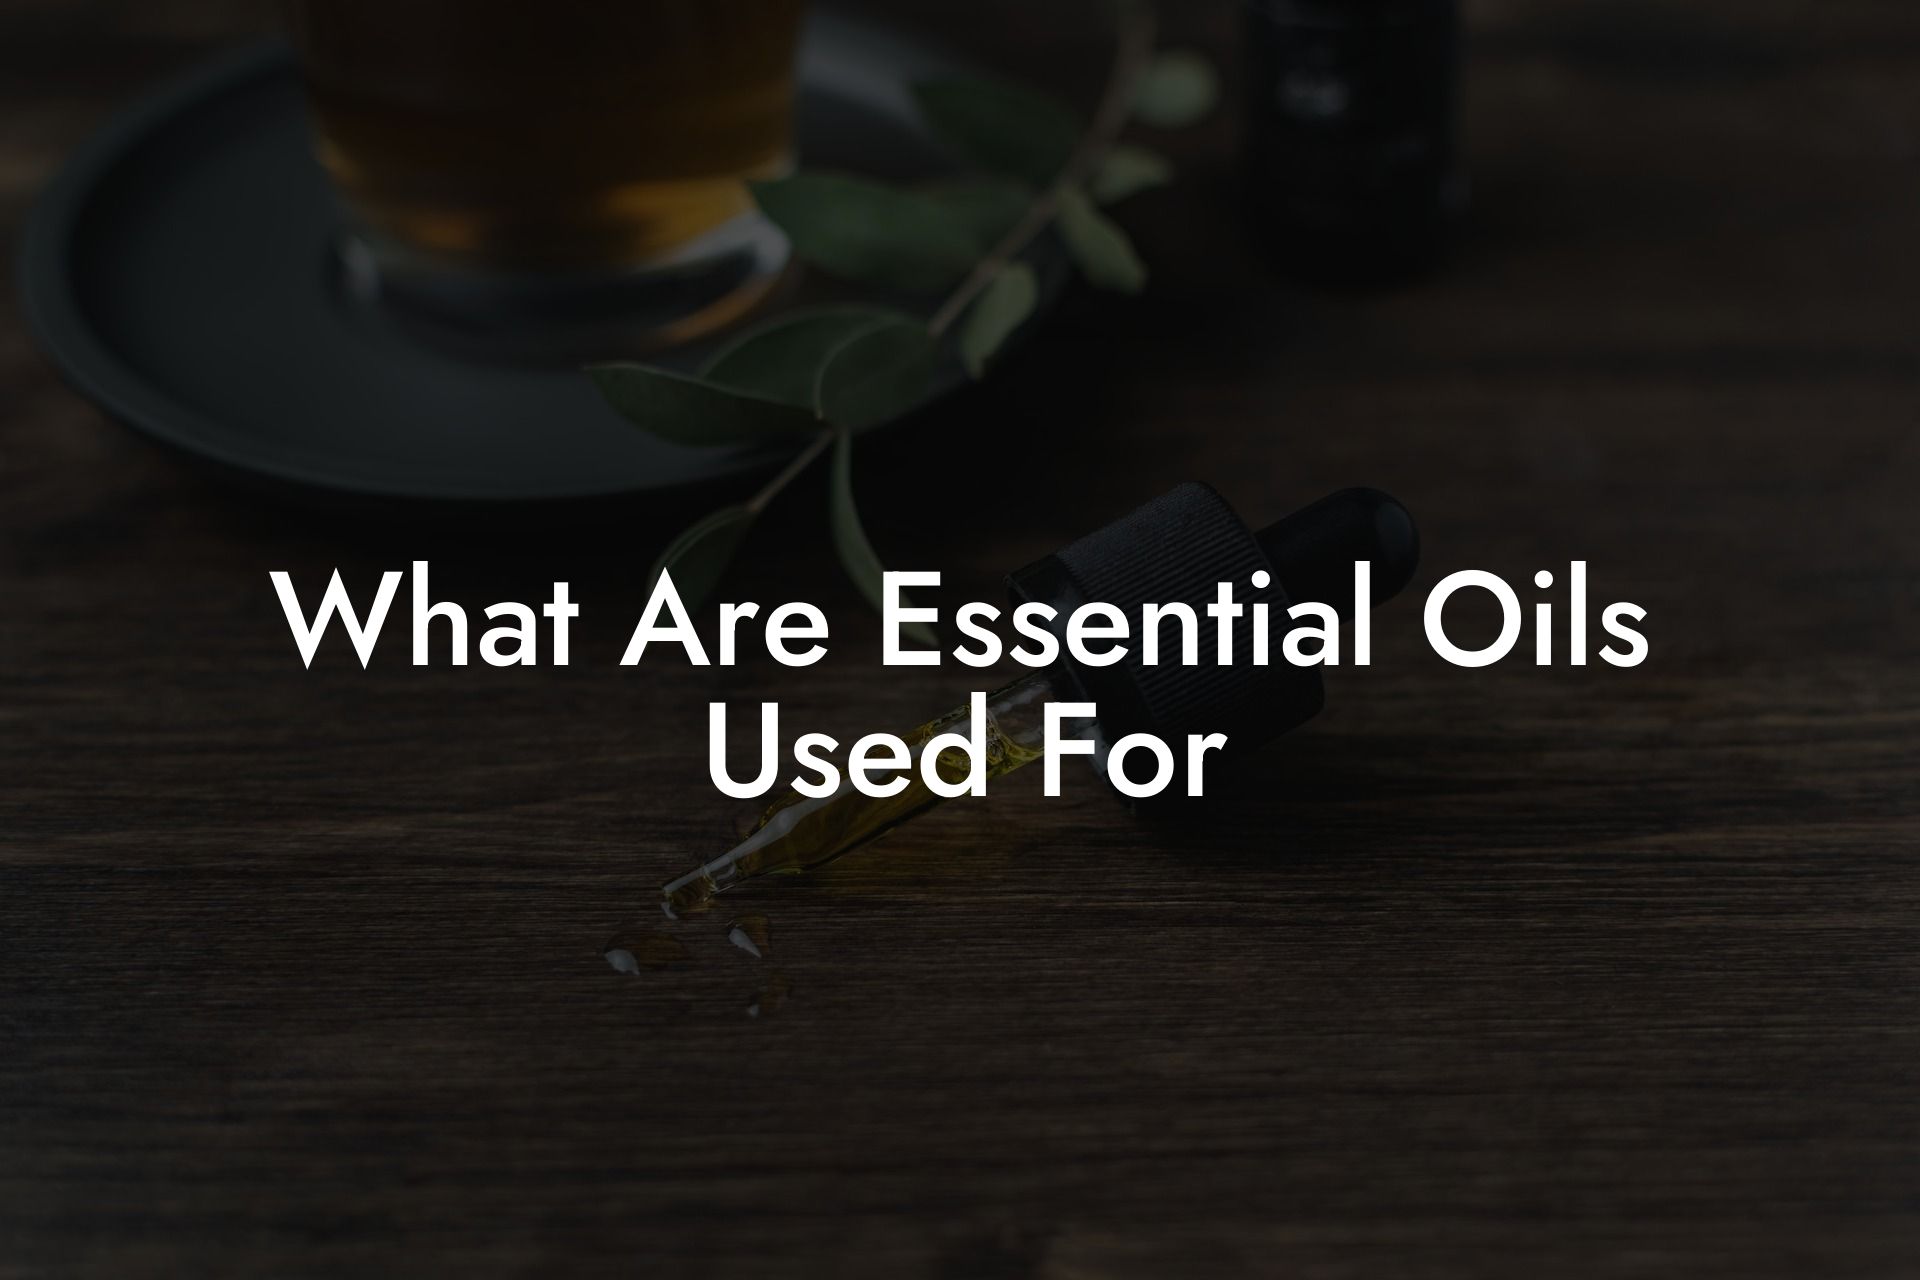 What Are Essential Oils Used For